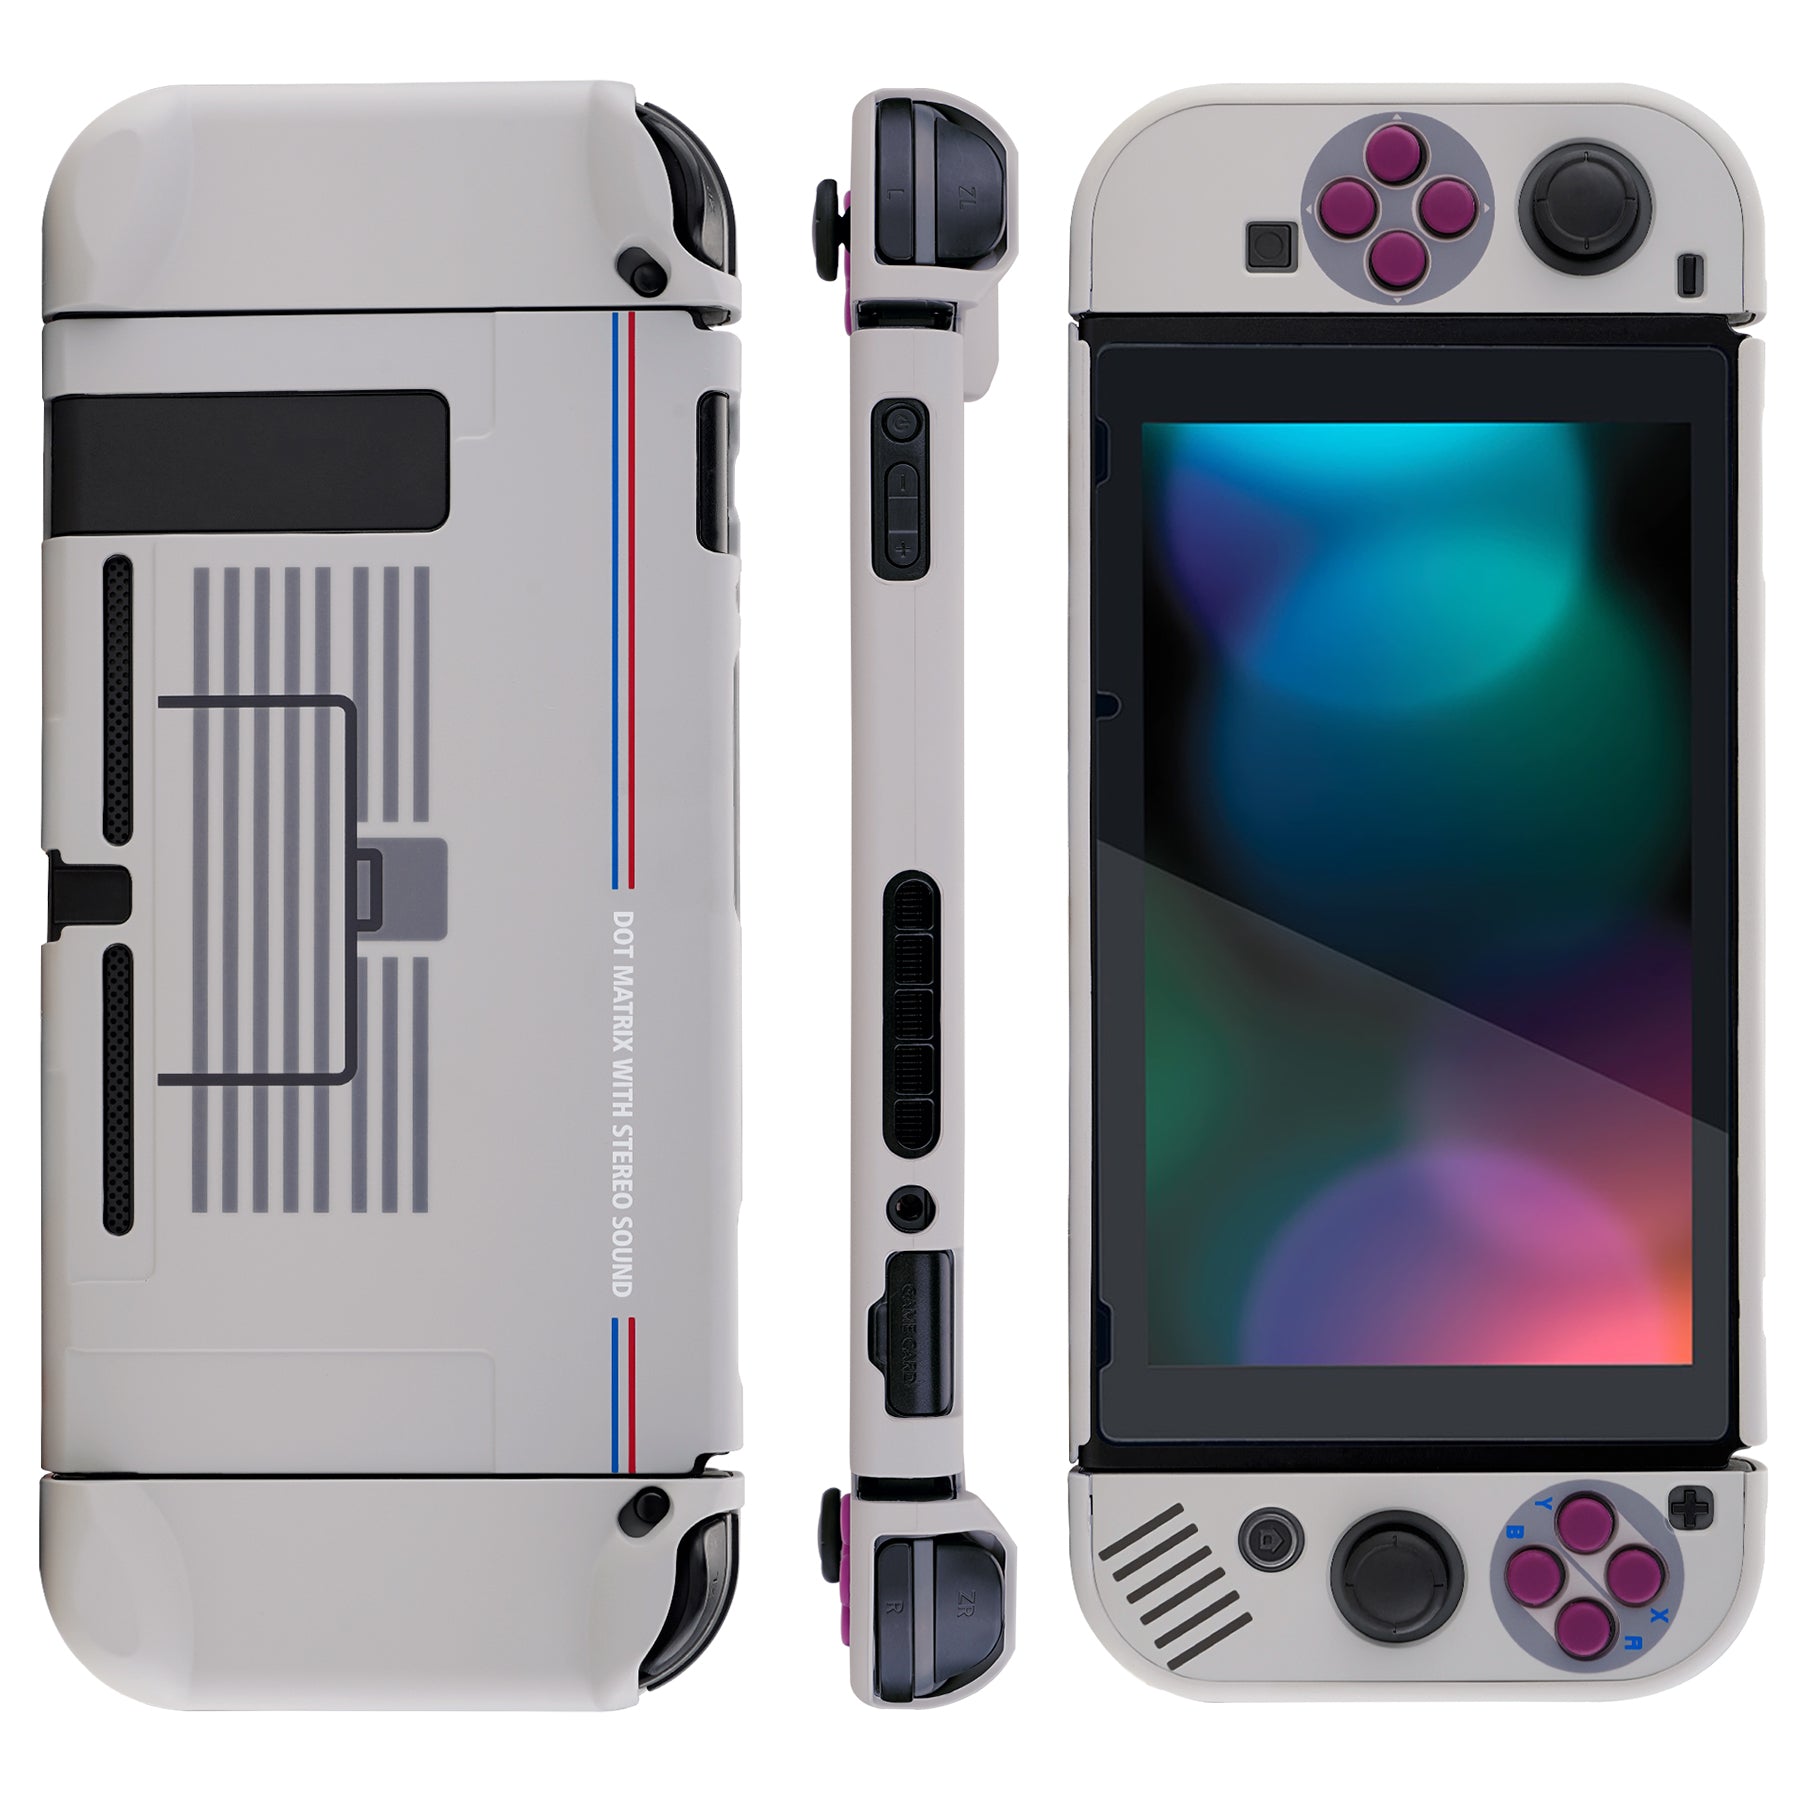 PlayVital Classic 1989 GB DMG-01 Back Cover for NS Switch Console, NS Joycon Handheld Controller Separable Protector Hard Shell, Dockable Protective Case with Red ABXY Direction Button Caps - NTT120 PlayVital